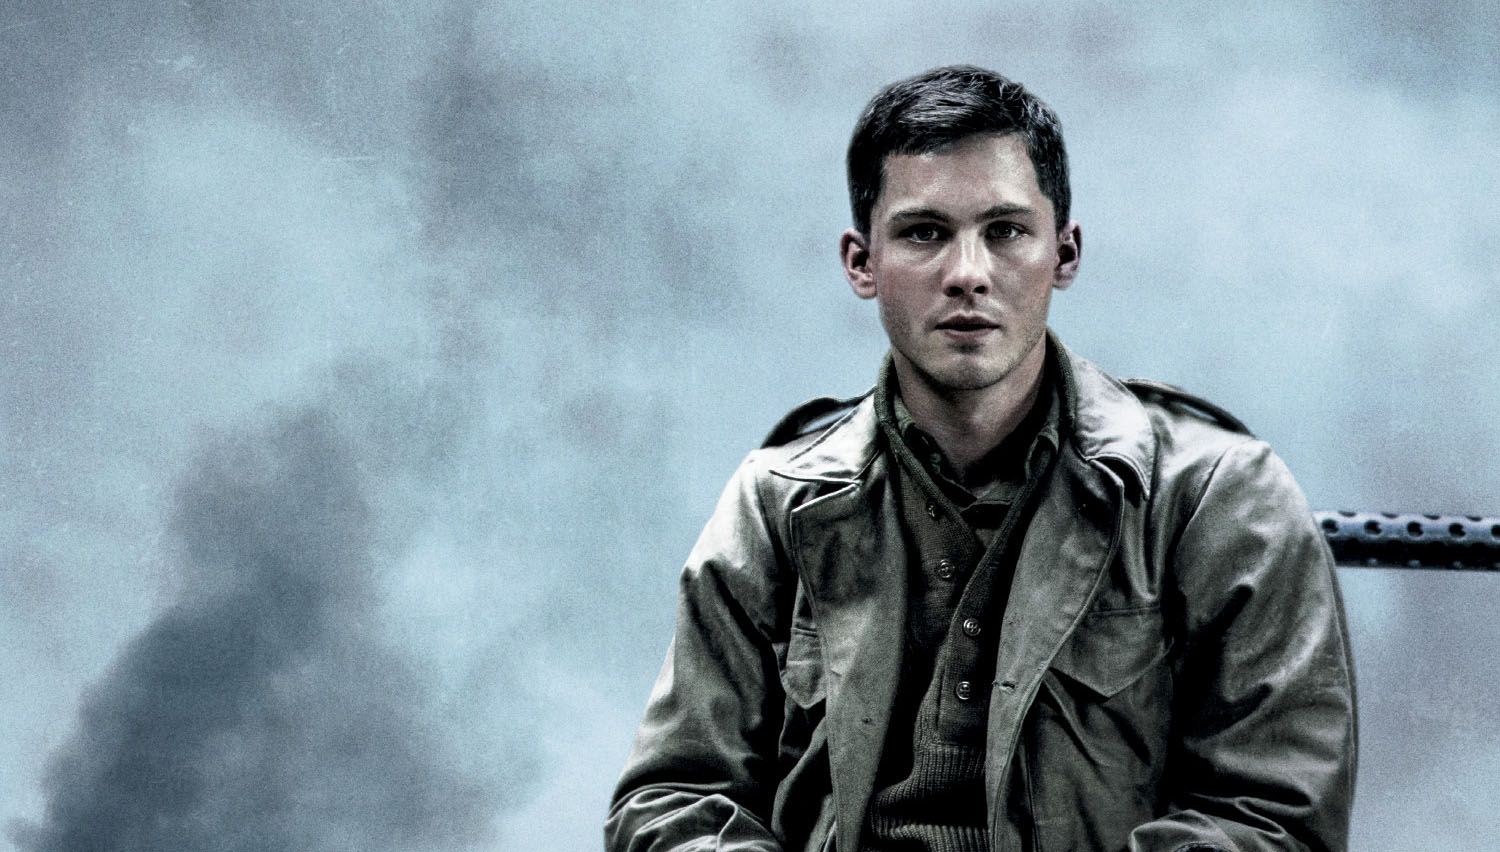 David Ayer's Fury gets new Character Posters